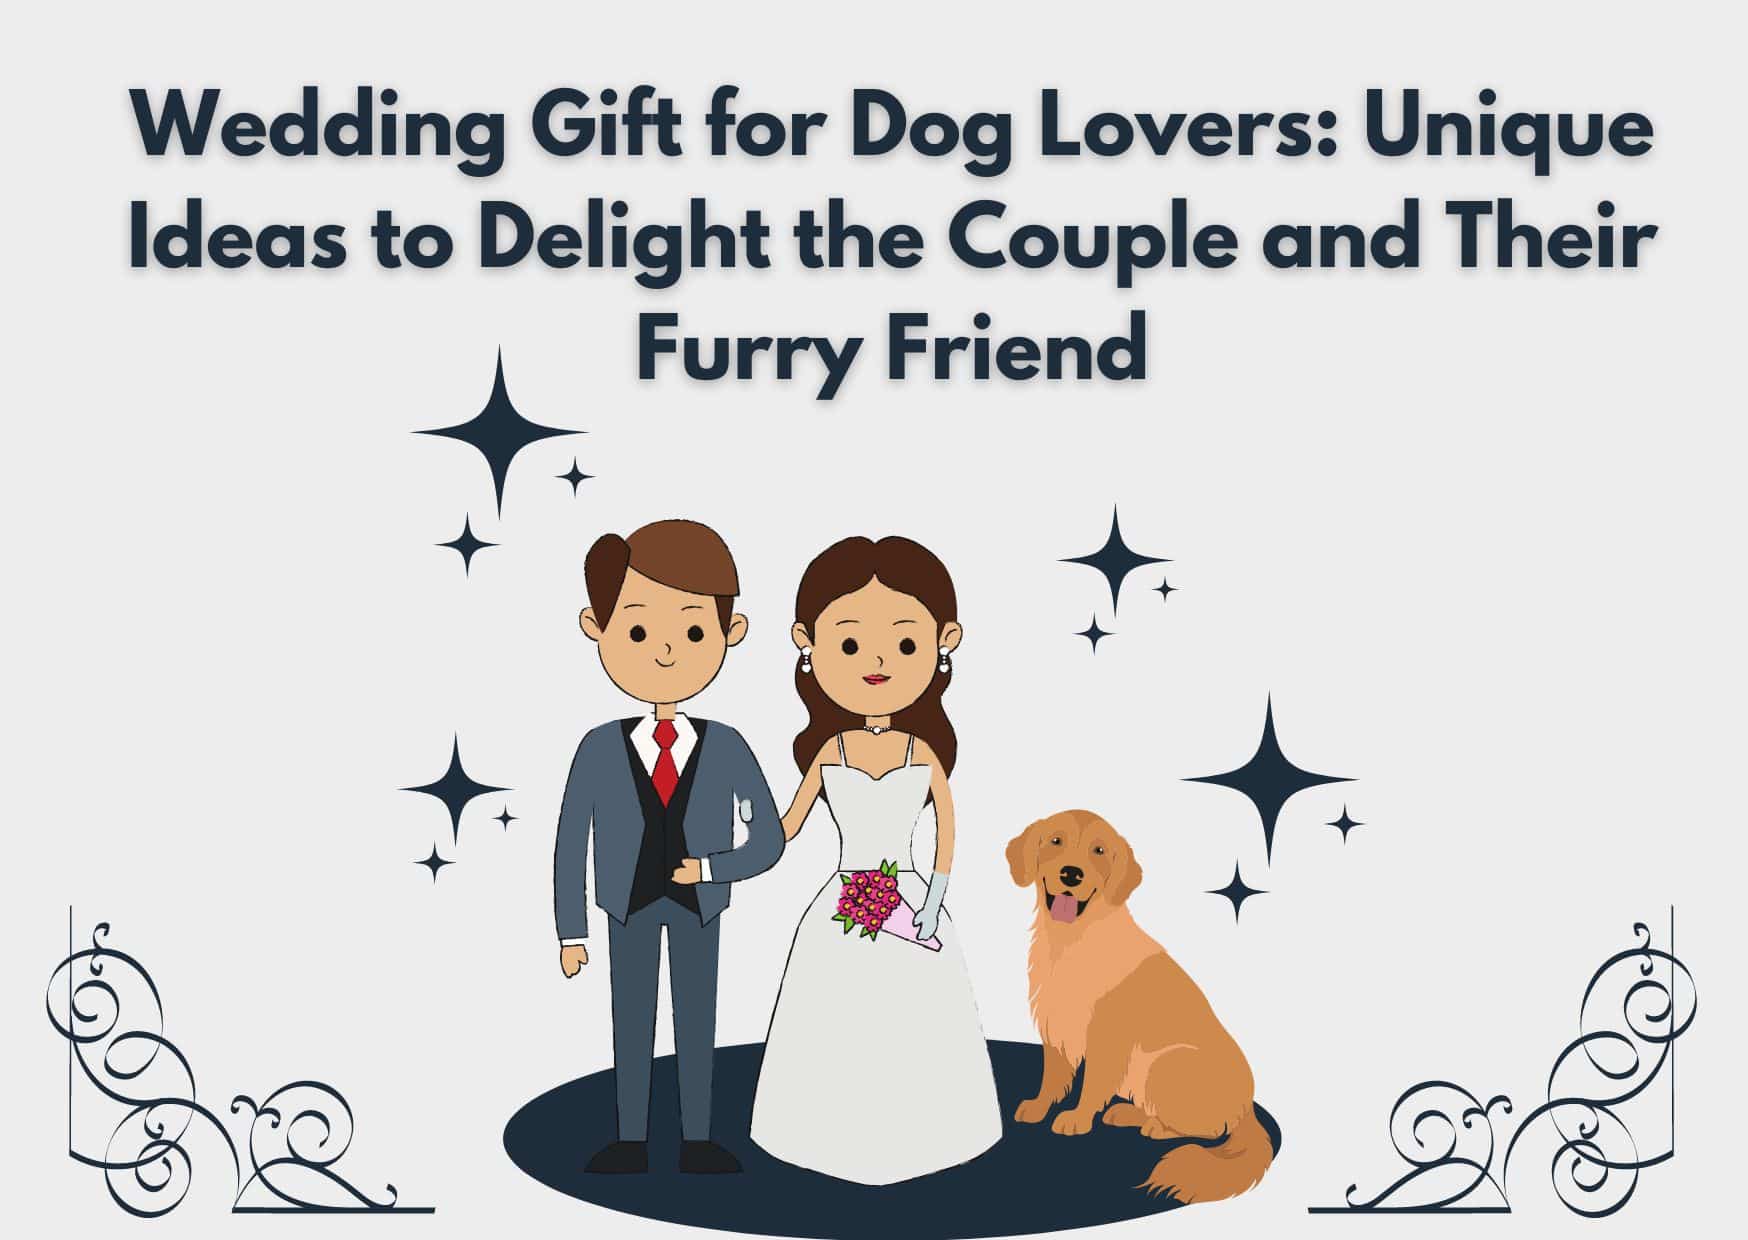 Wedding Gift for Dog Lovers: Unique Ideas to Delight the Couple and Their Furry Friend